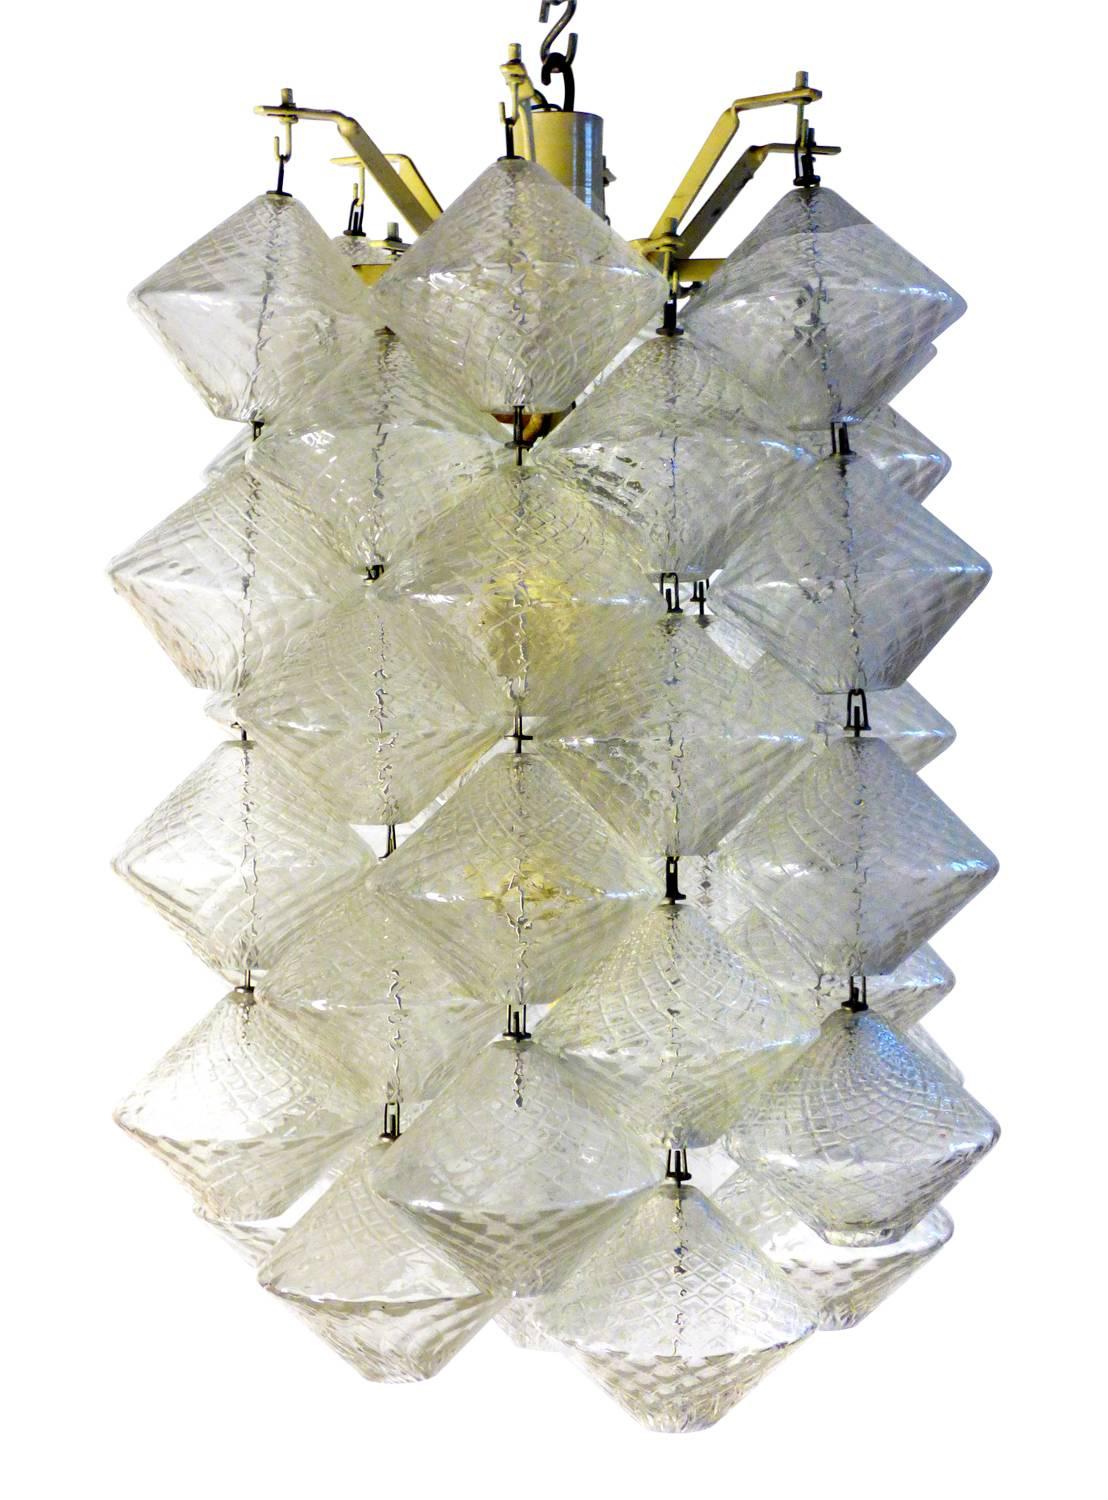 Pair of Murano glass chandeliers with metal structure, blown glass elements, produced by Salviati in 1956 and designed by Vinicio Vianello.

Biography 
Vinicio Vianello (Venice, 1923 - Zelarino-VE 1999), a multifaceted artist-designer who adhered to